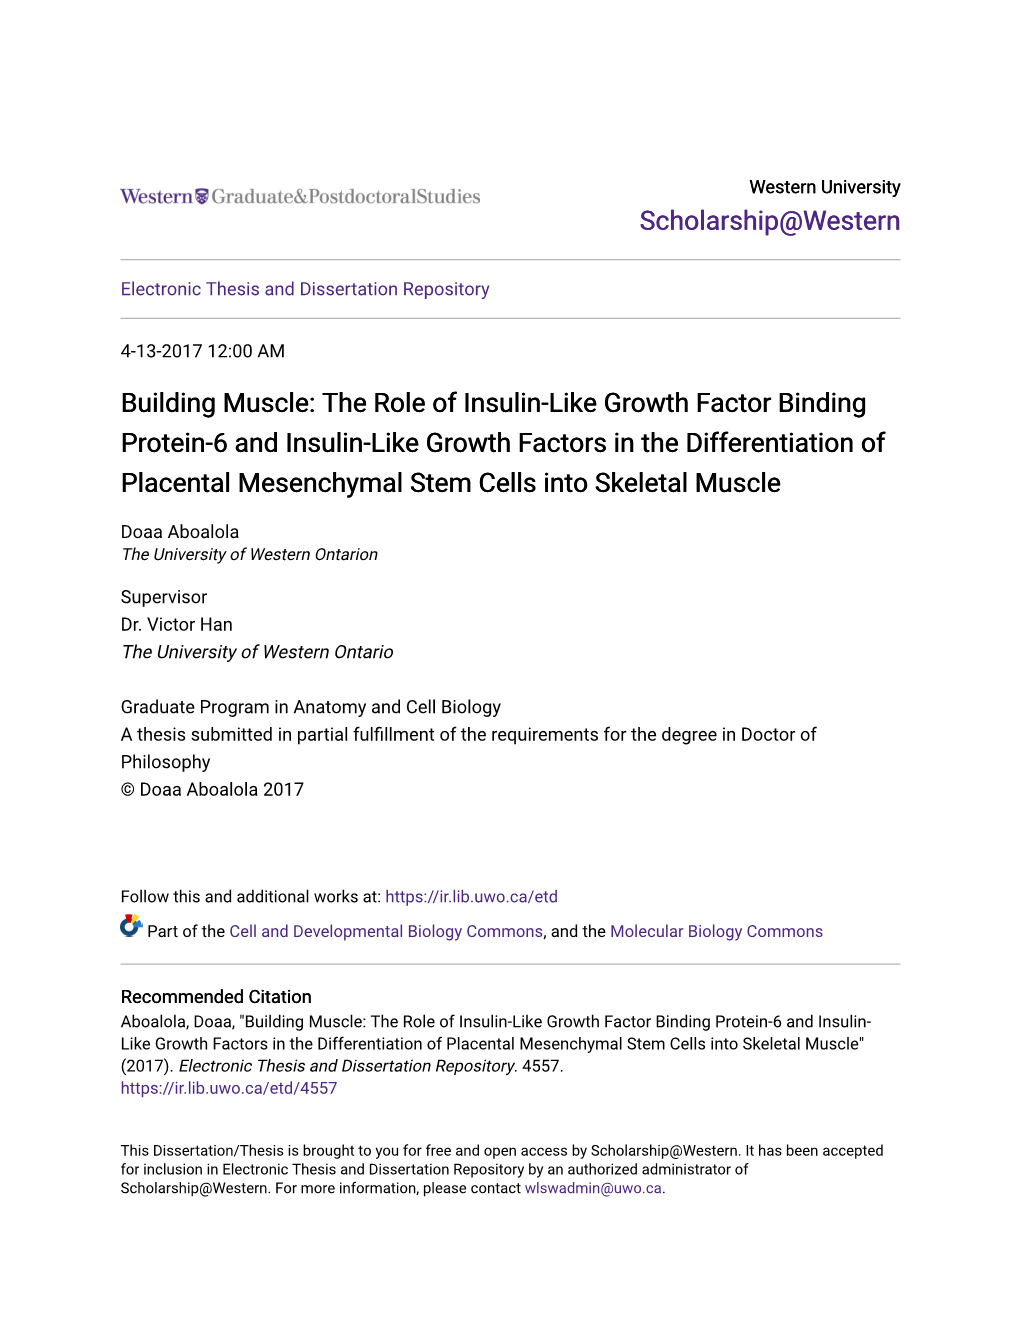 The Role of Insulin-Like Growth Factor Binding Protein-6 and Insulin-Like